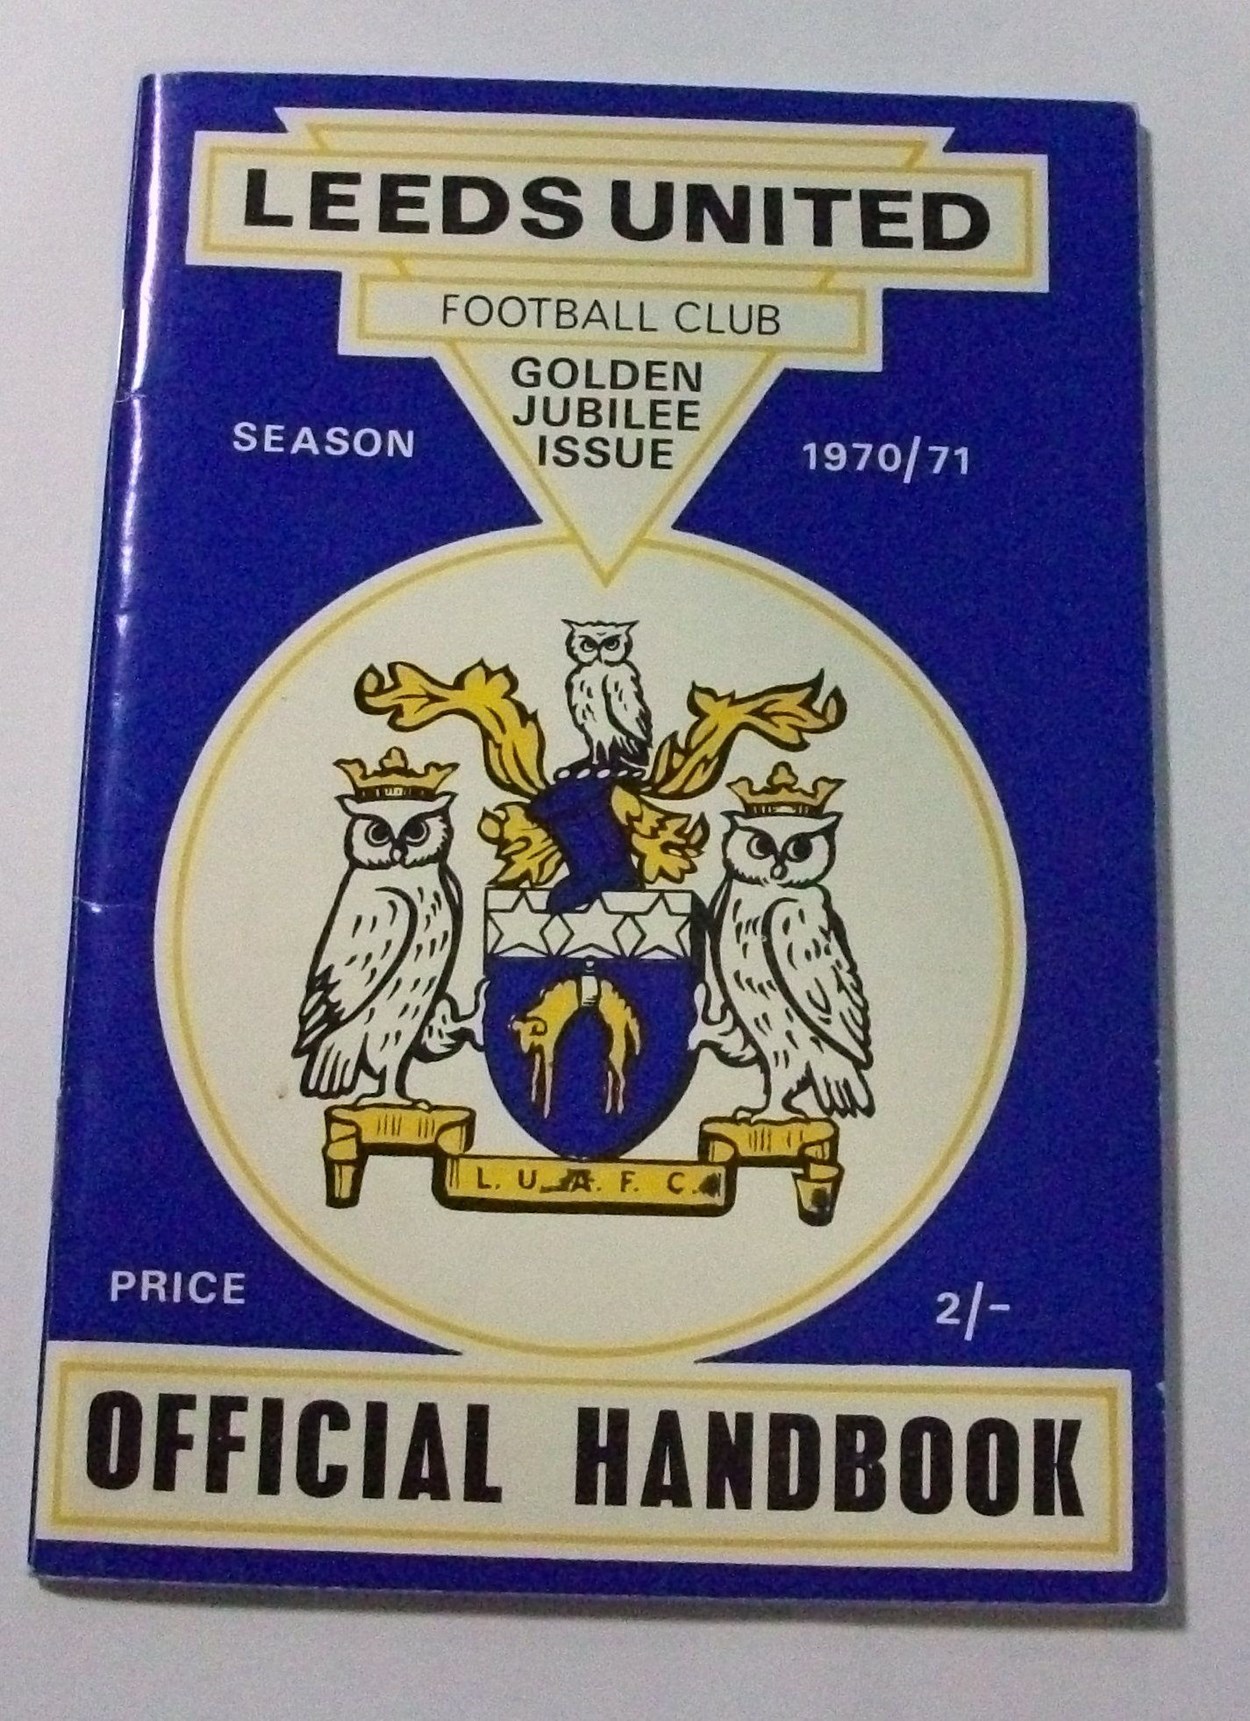 Leeds United Official Handbook 1970. Image: © Leeds United Football Club: Leeds United Official Handbook from 1970 – 1971 season. Note the use of the Leeds City crest on the front, which was used as the team badge for a while. Image: © Leeds United Football Club